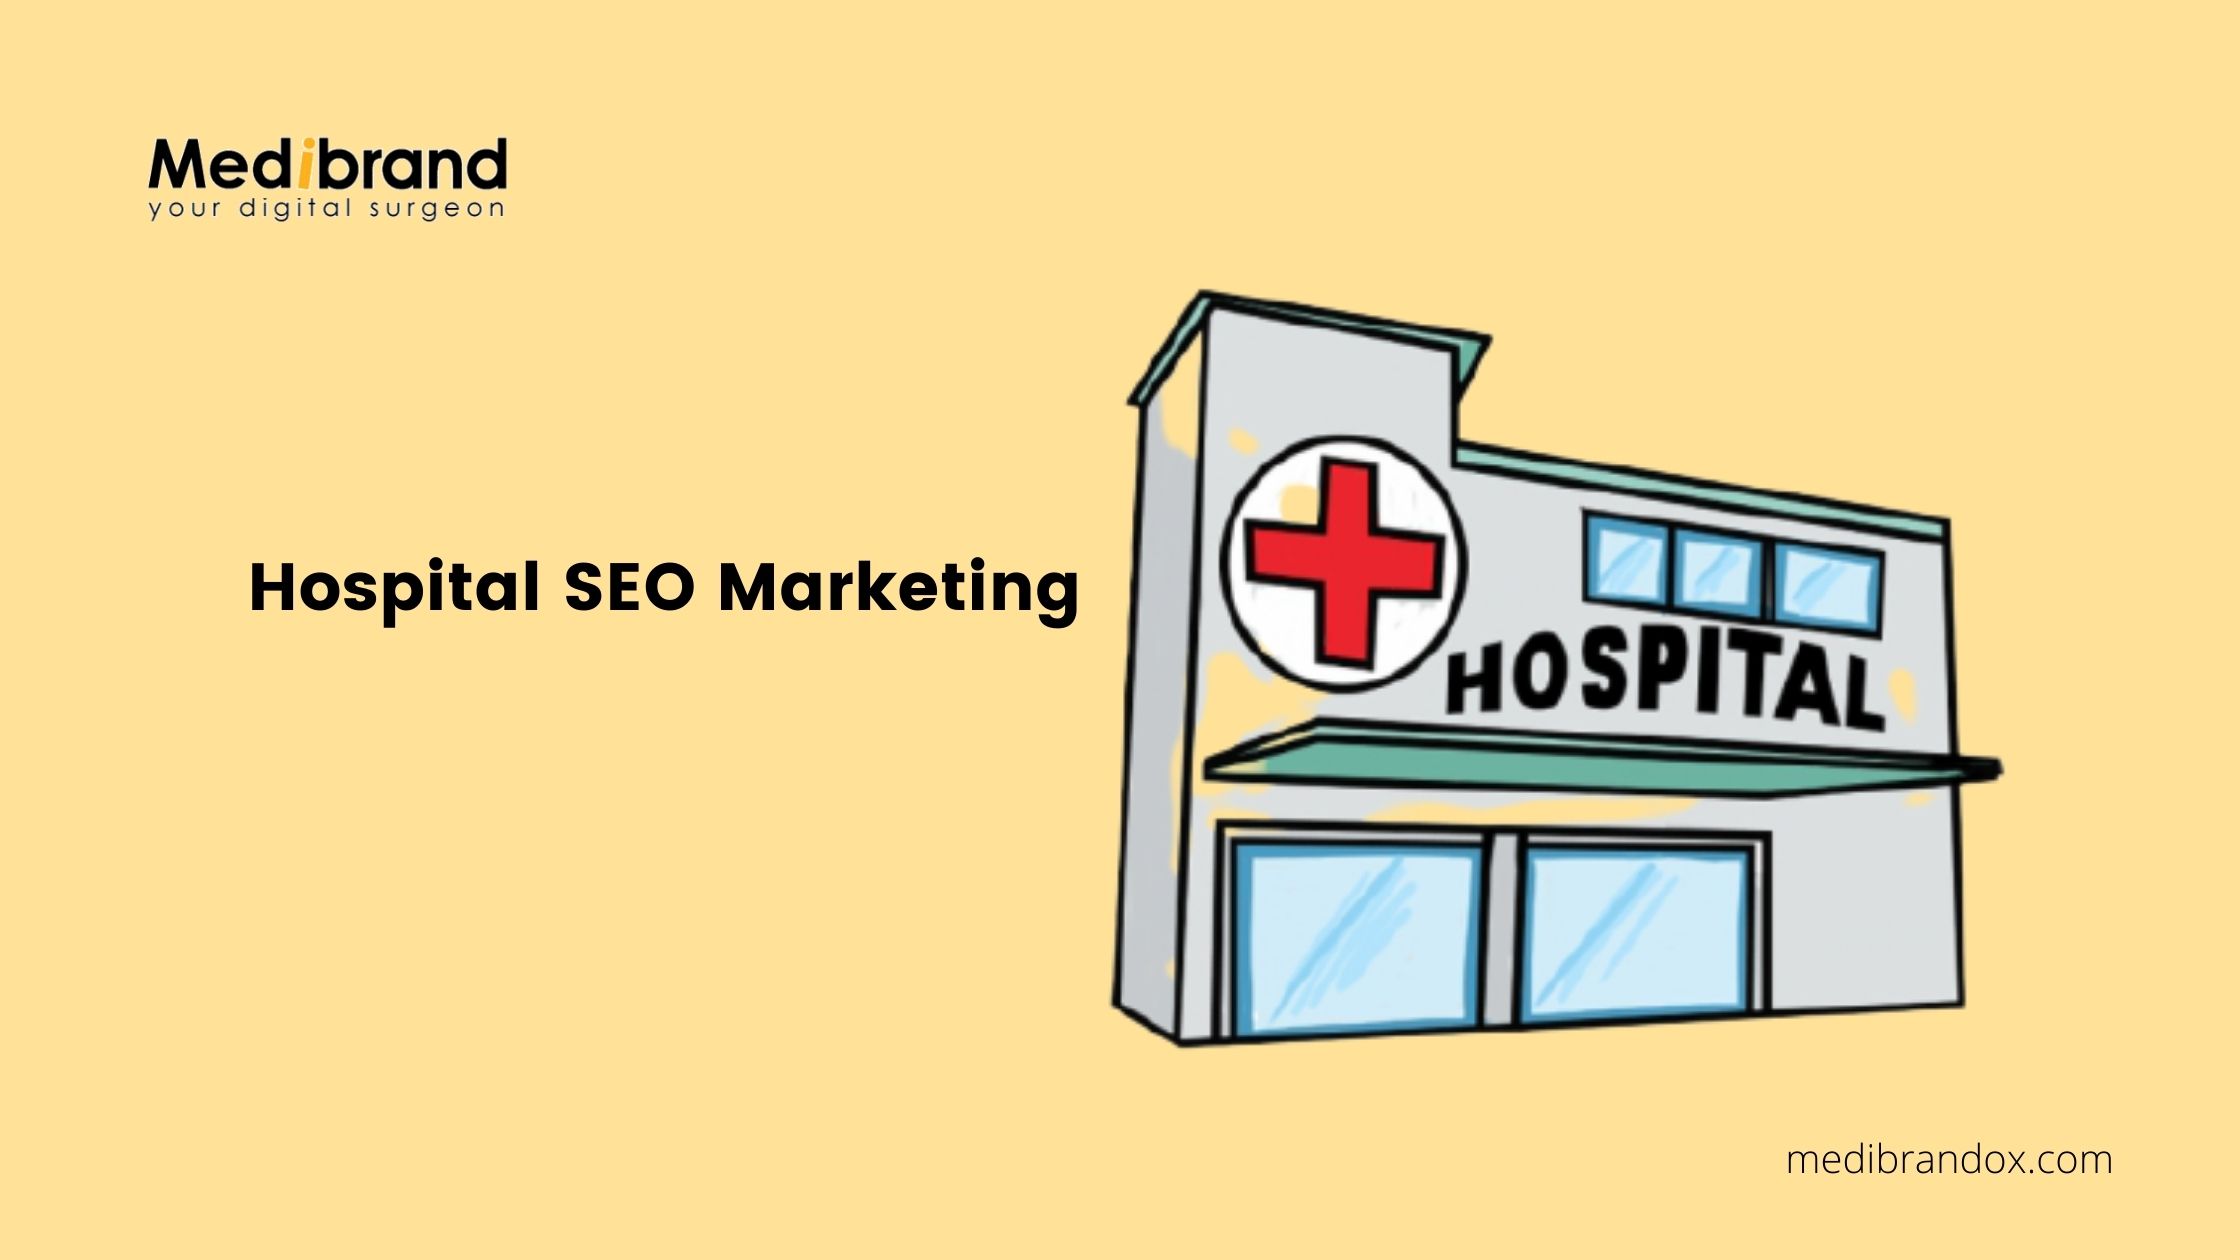 Article about Hospital SEO Marketing Helps To Reach Your Patient